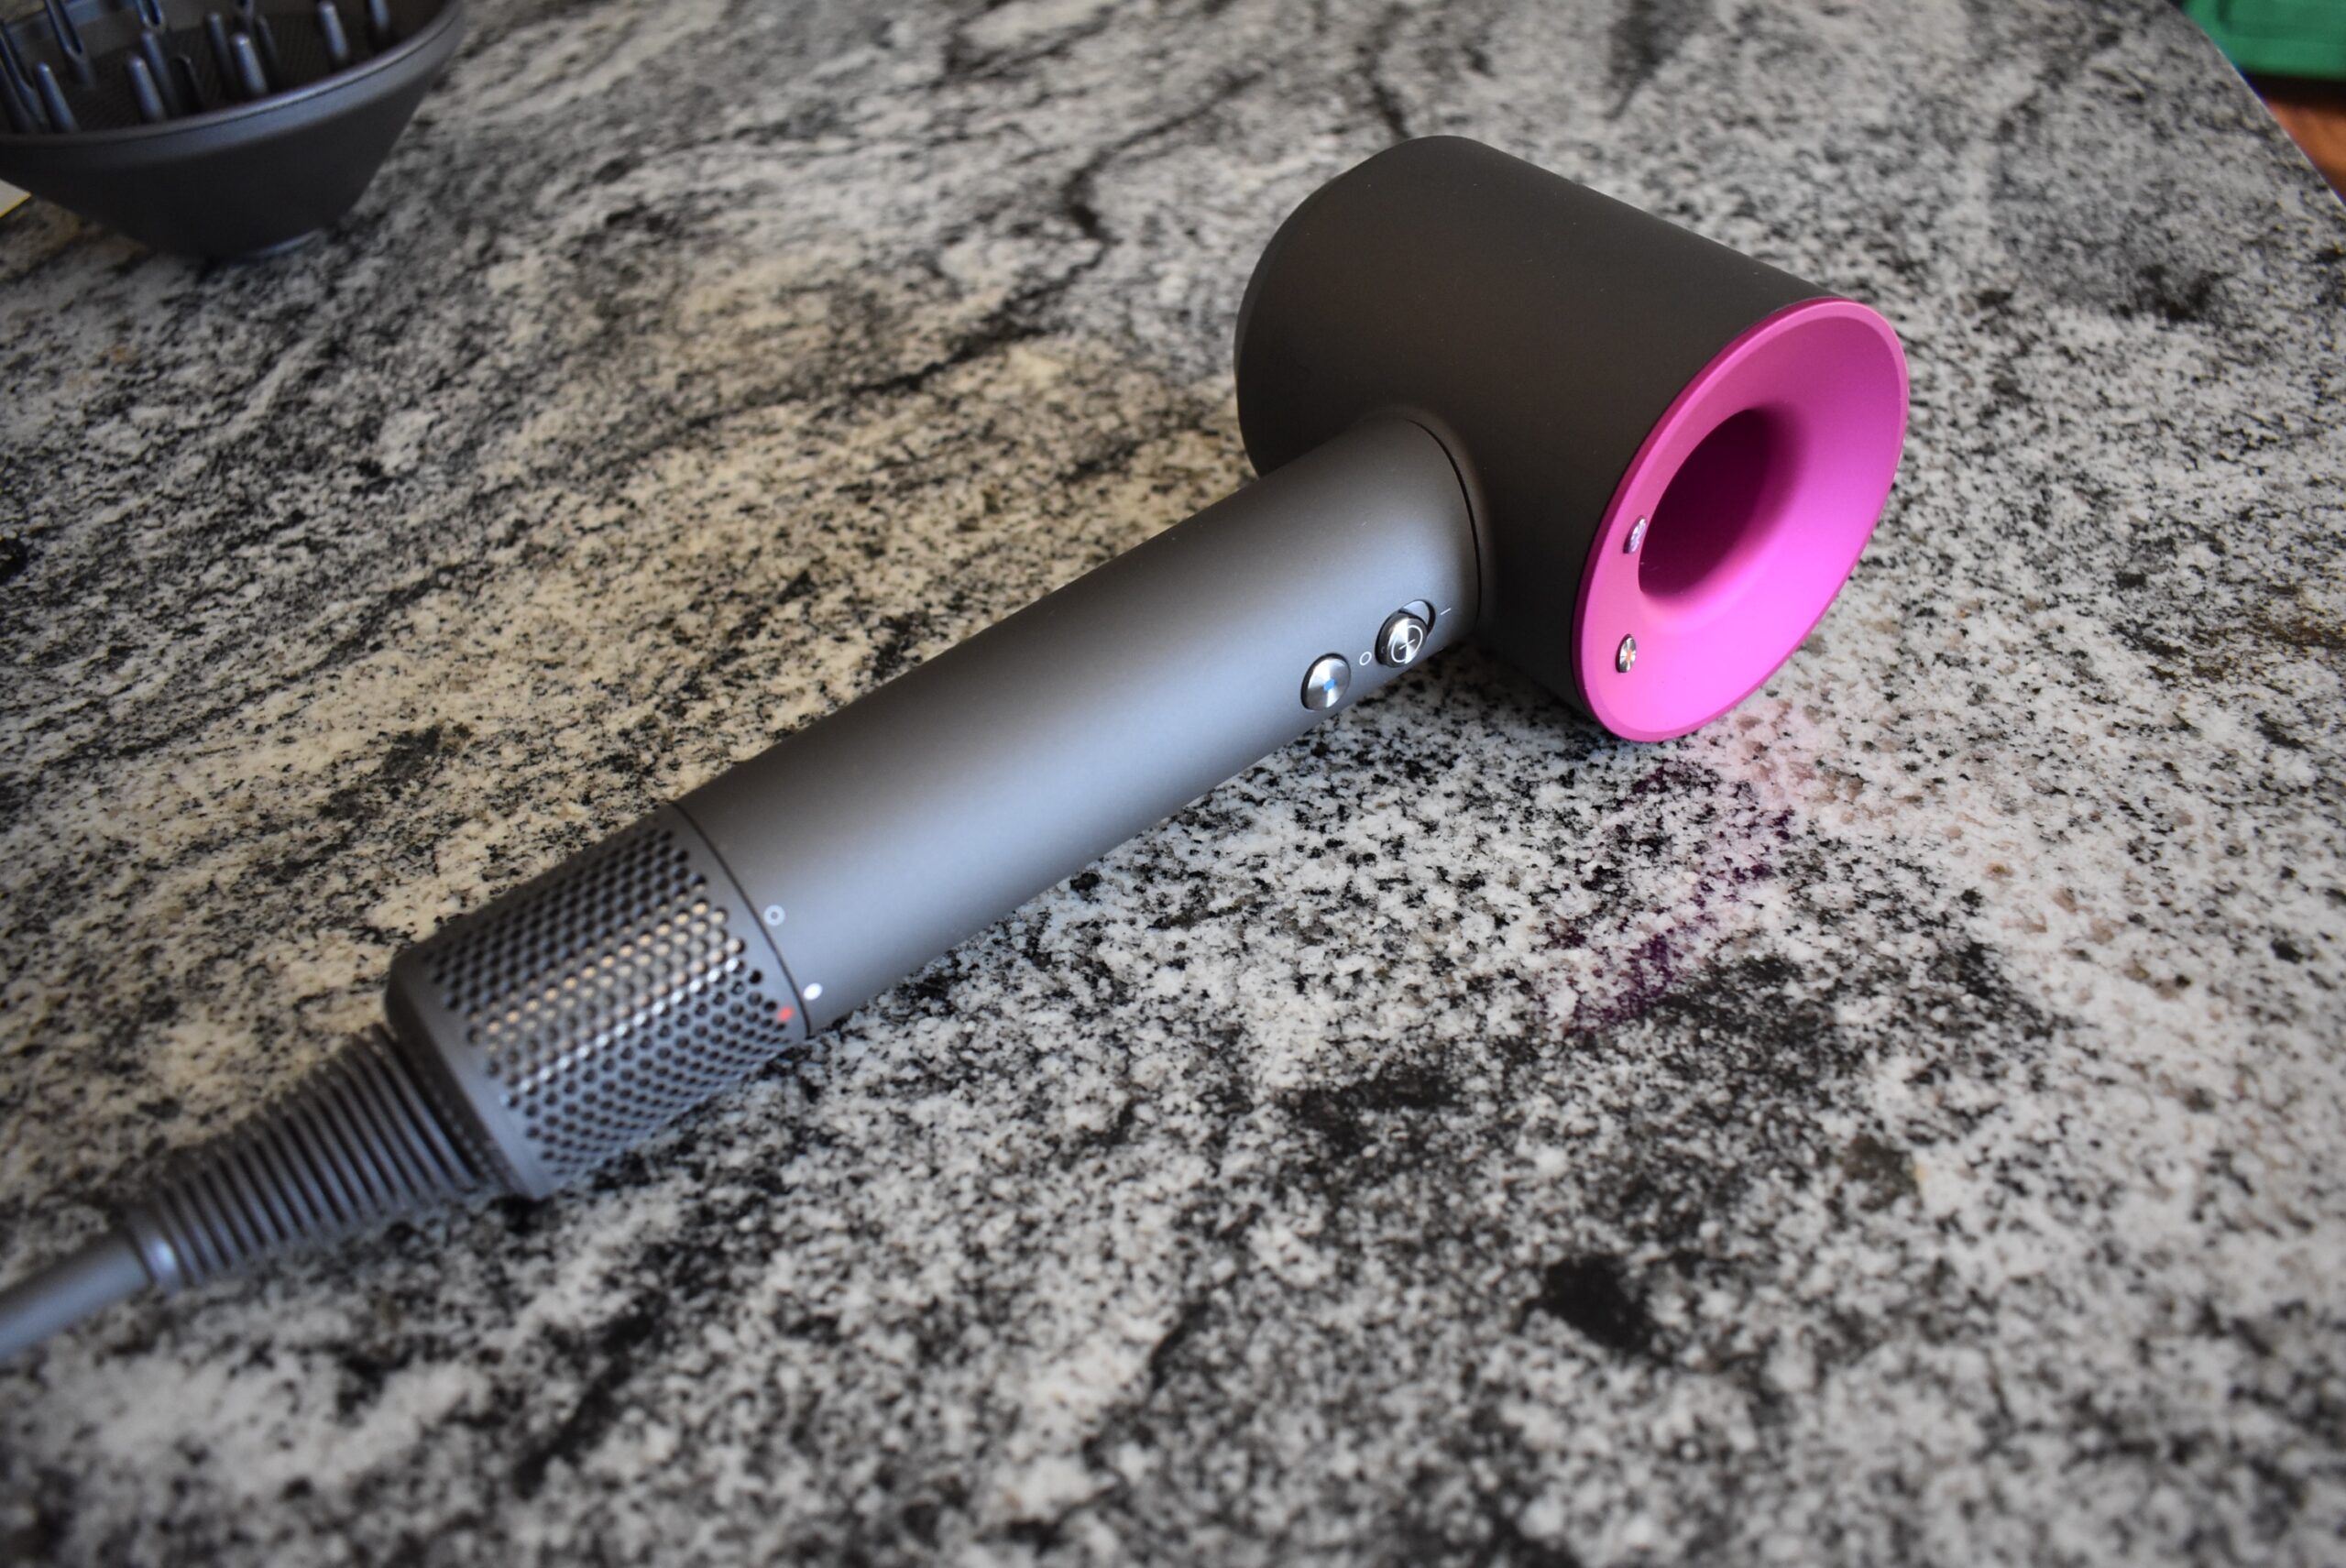 Close-up of a side profile of the Dyson Supersonic hair dryer